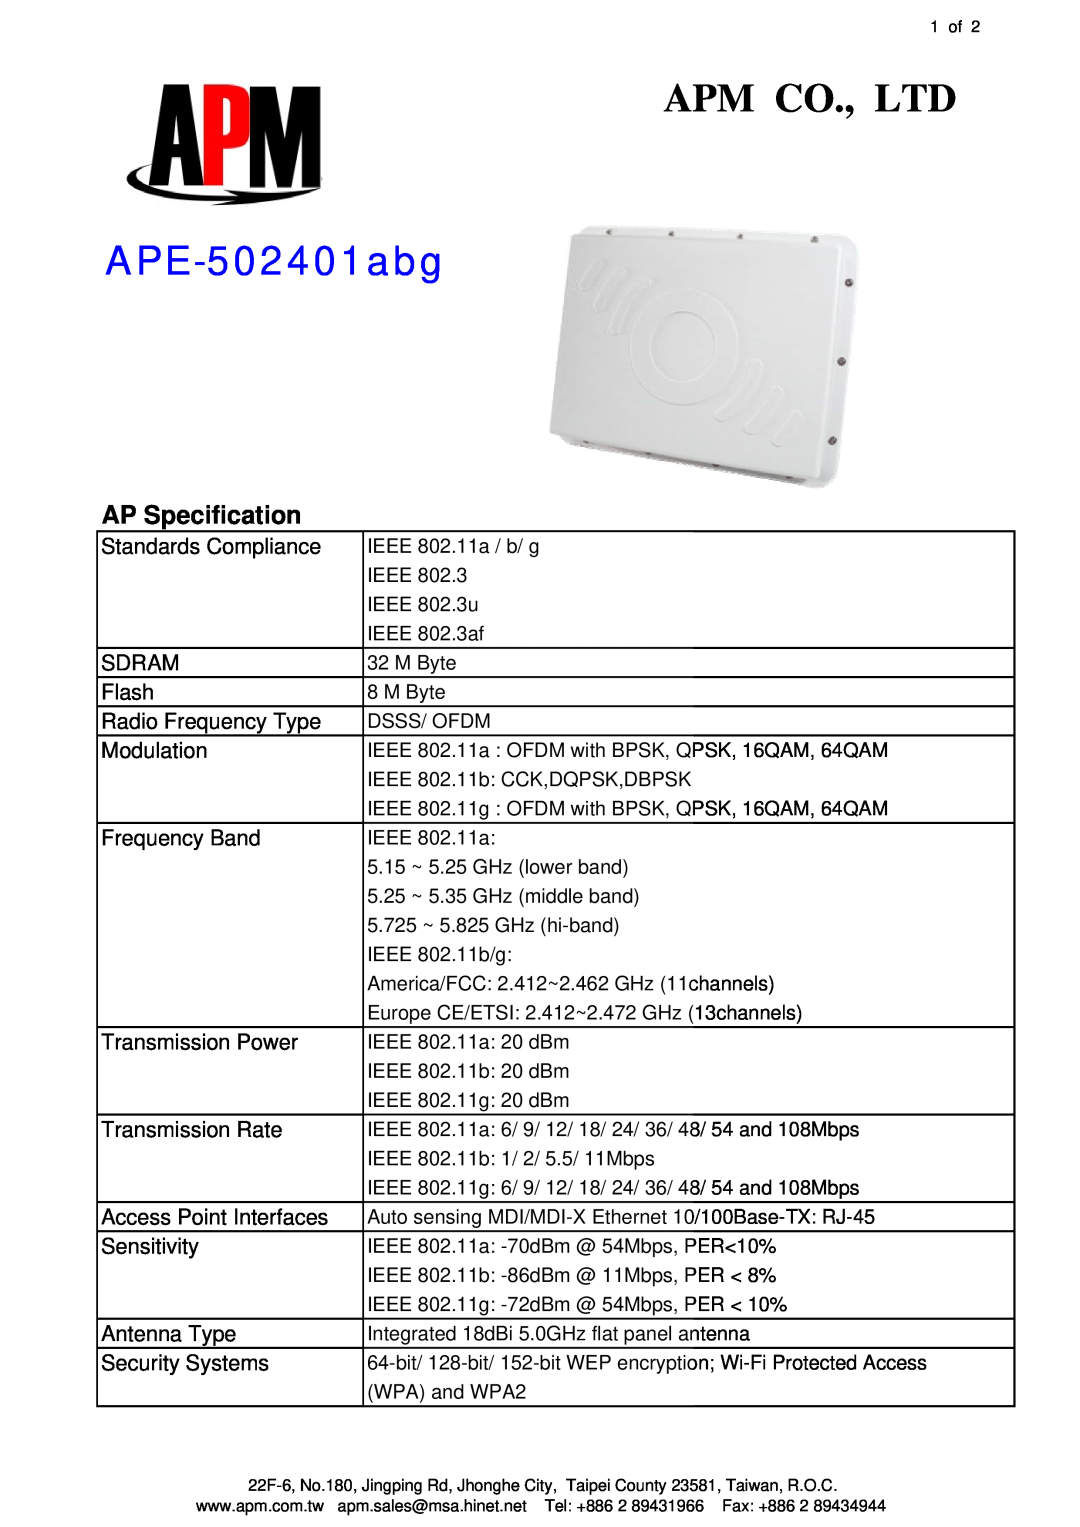 APM APE-502401abg specifications AP Specification 